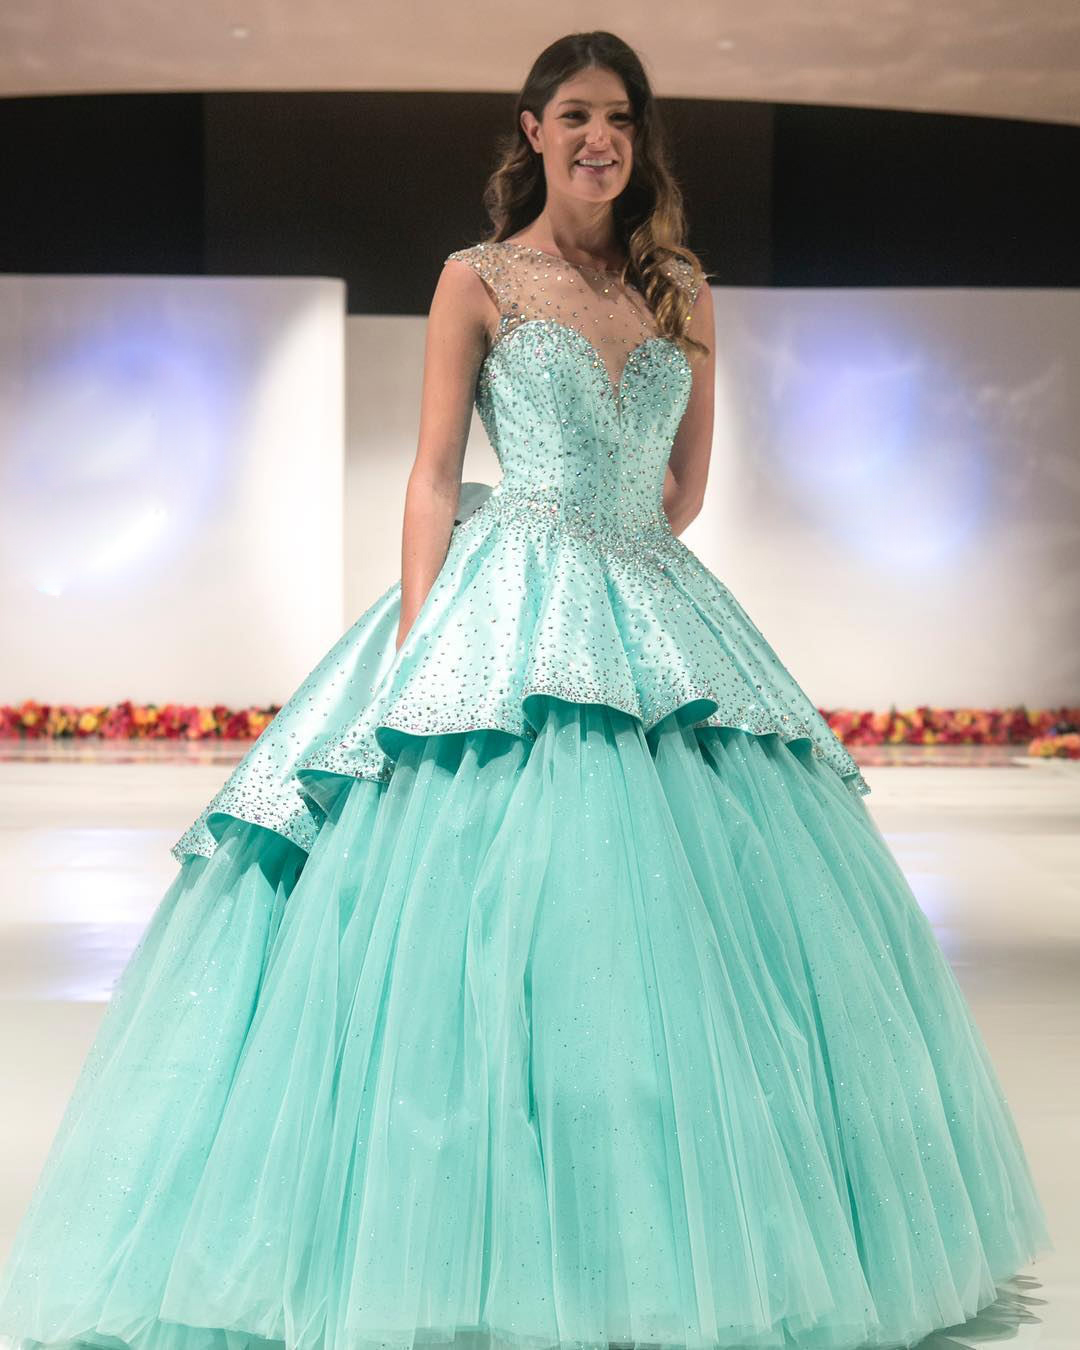 Glitter Mint Quinceanera Dresses Beaded Satin Prom Dresses Puffy Tulle Sweet Party Wedding Ball Gowns